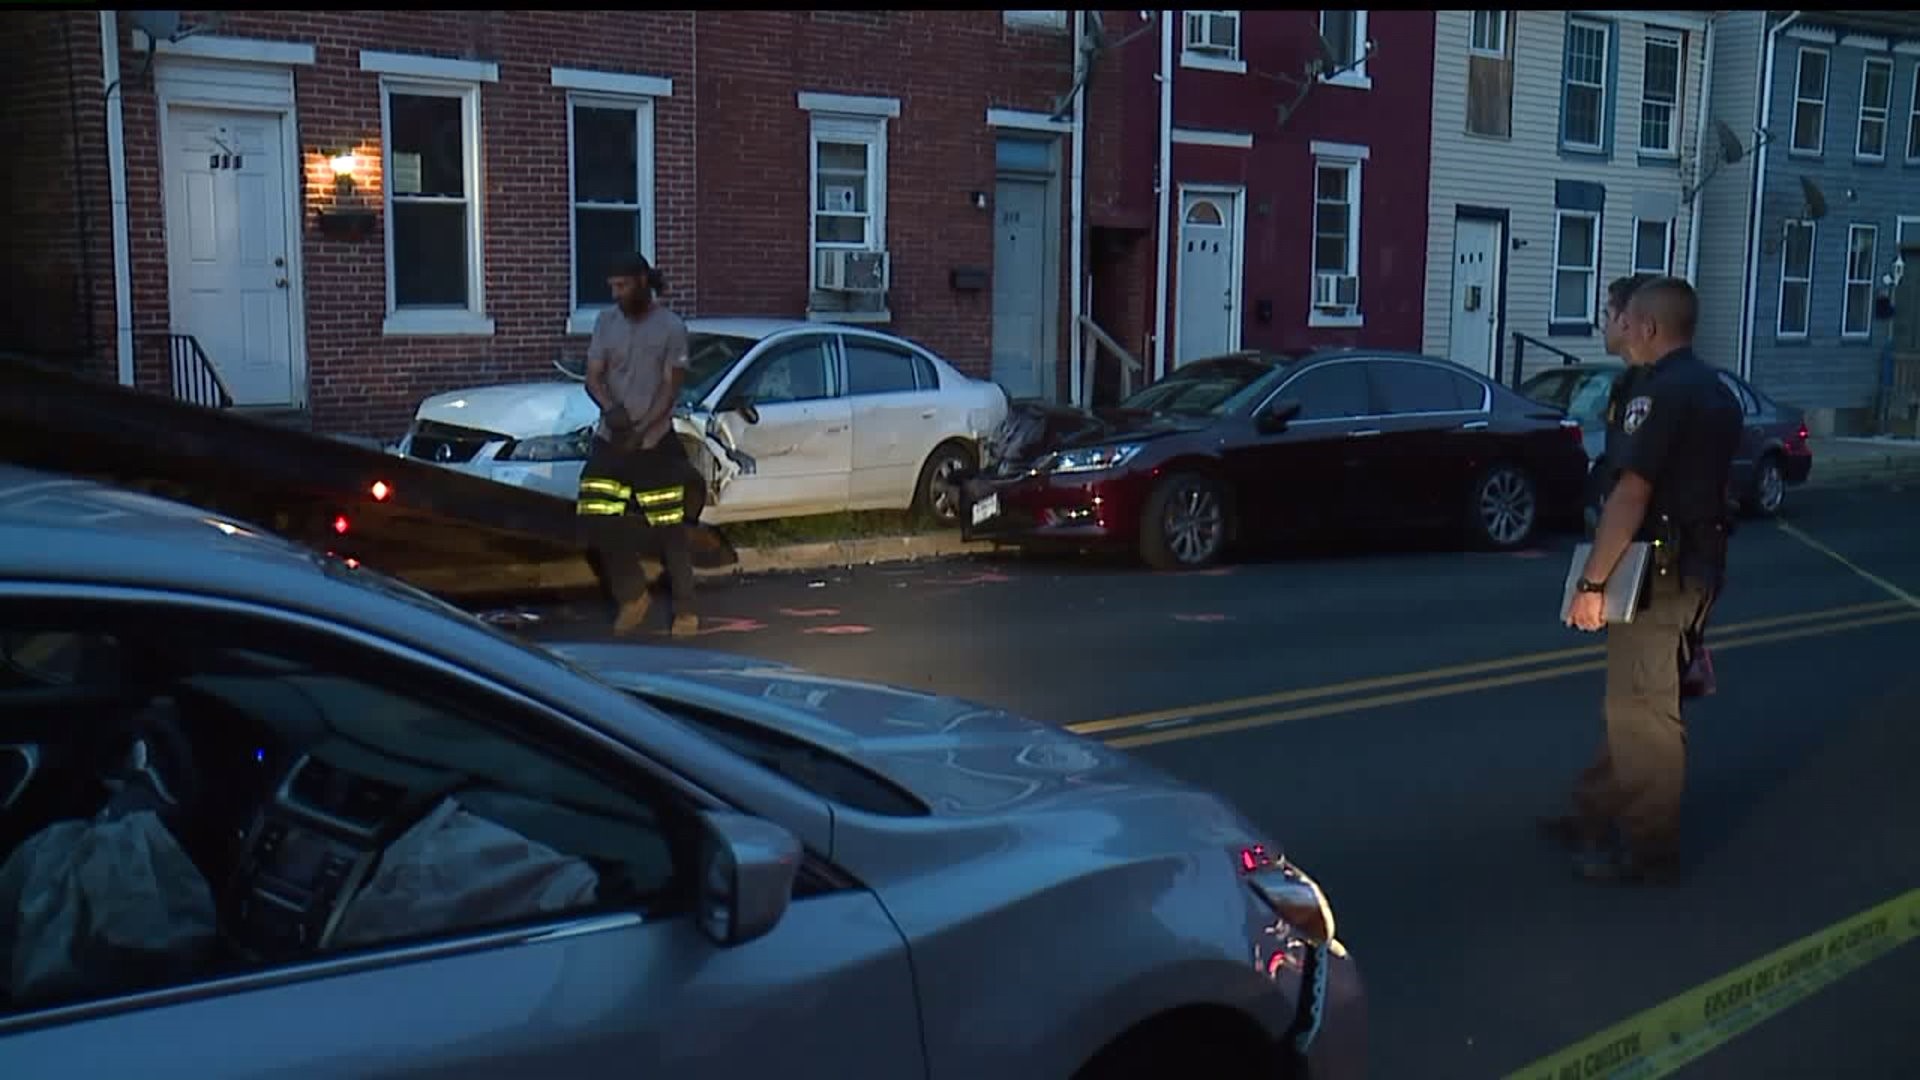 Neighbors speak out after shooting in York City